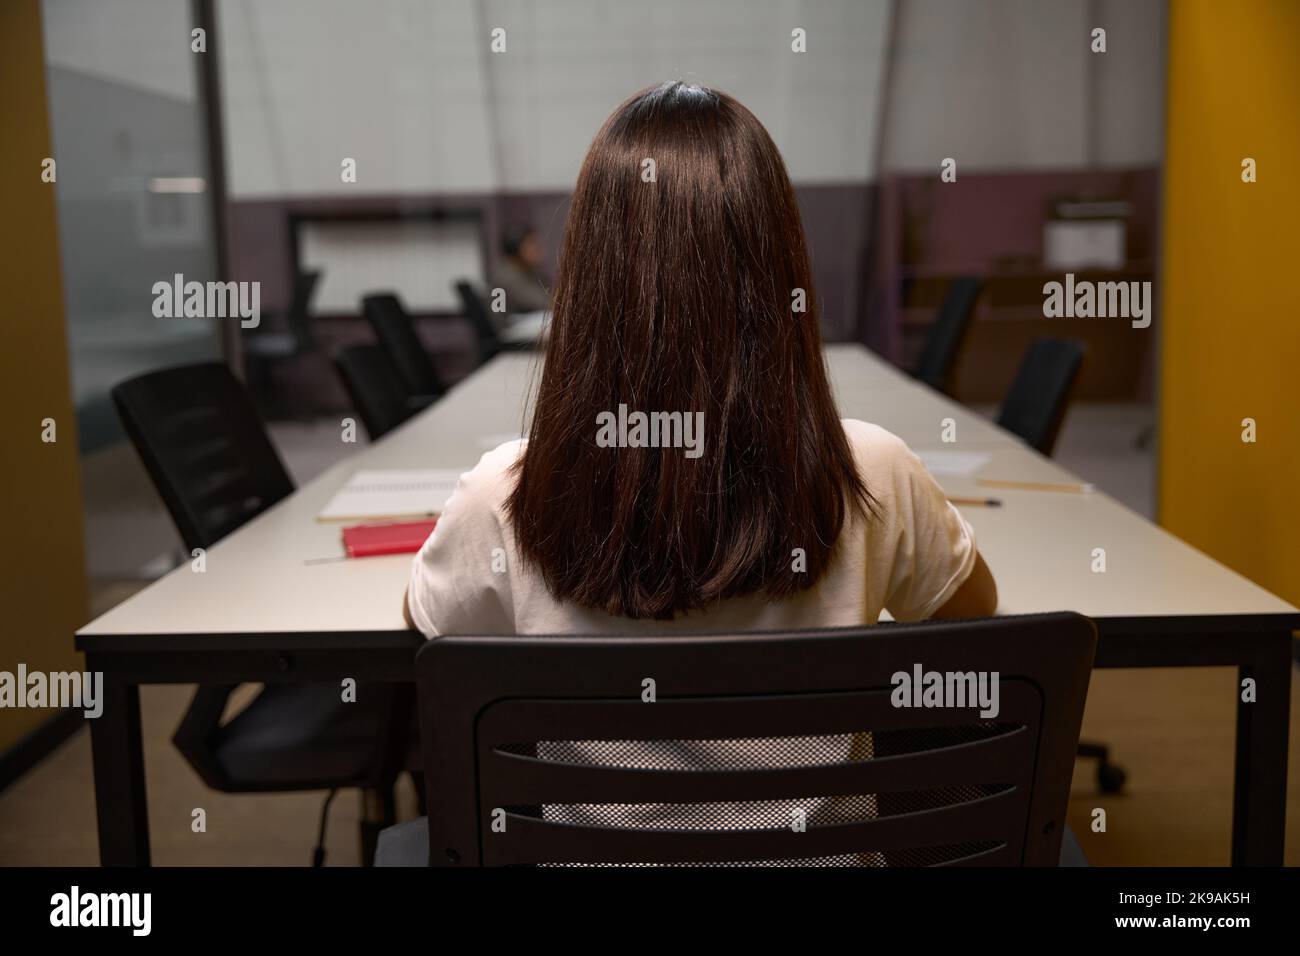 Unrecognized female is working in the meeting room Stock Photo